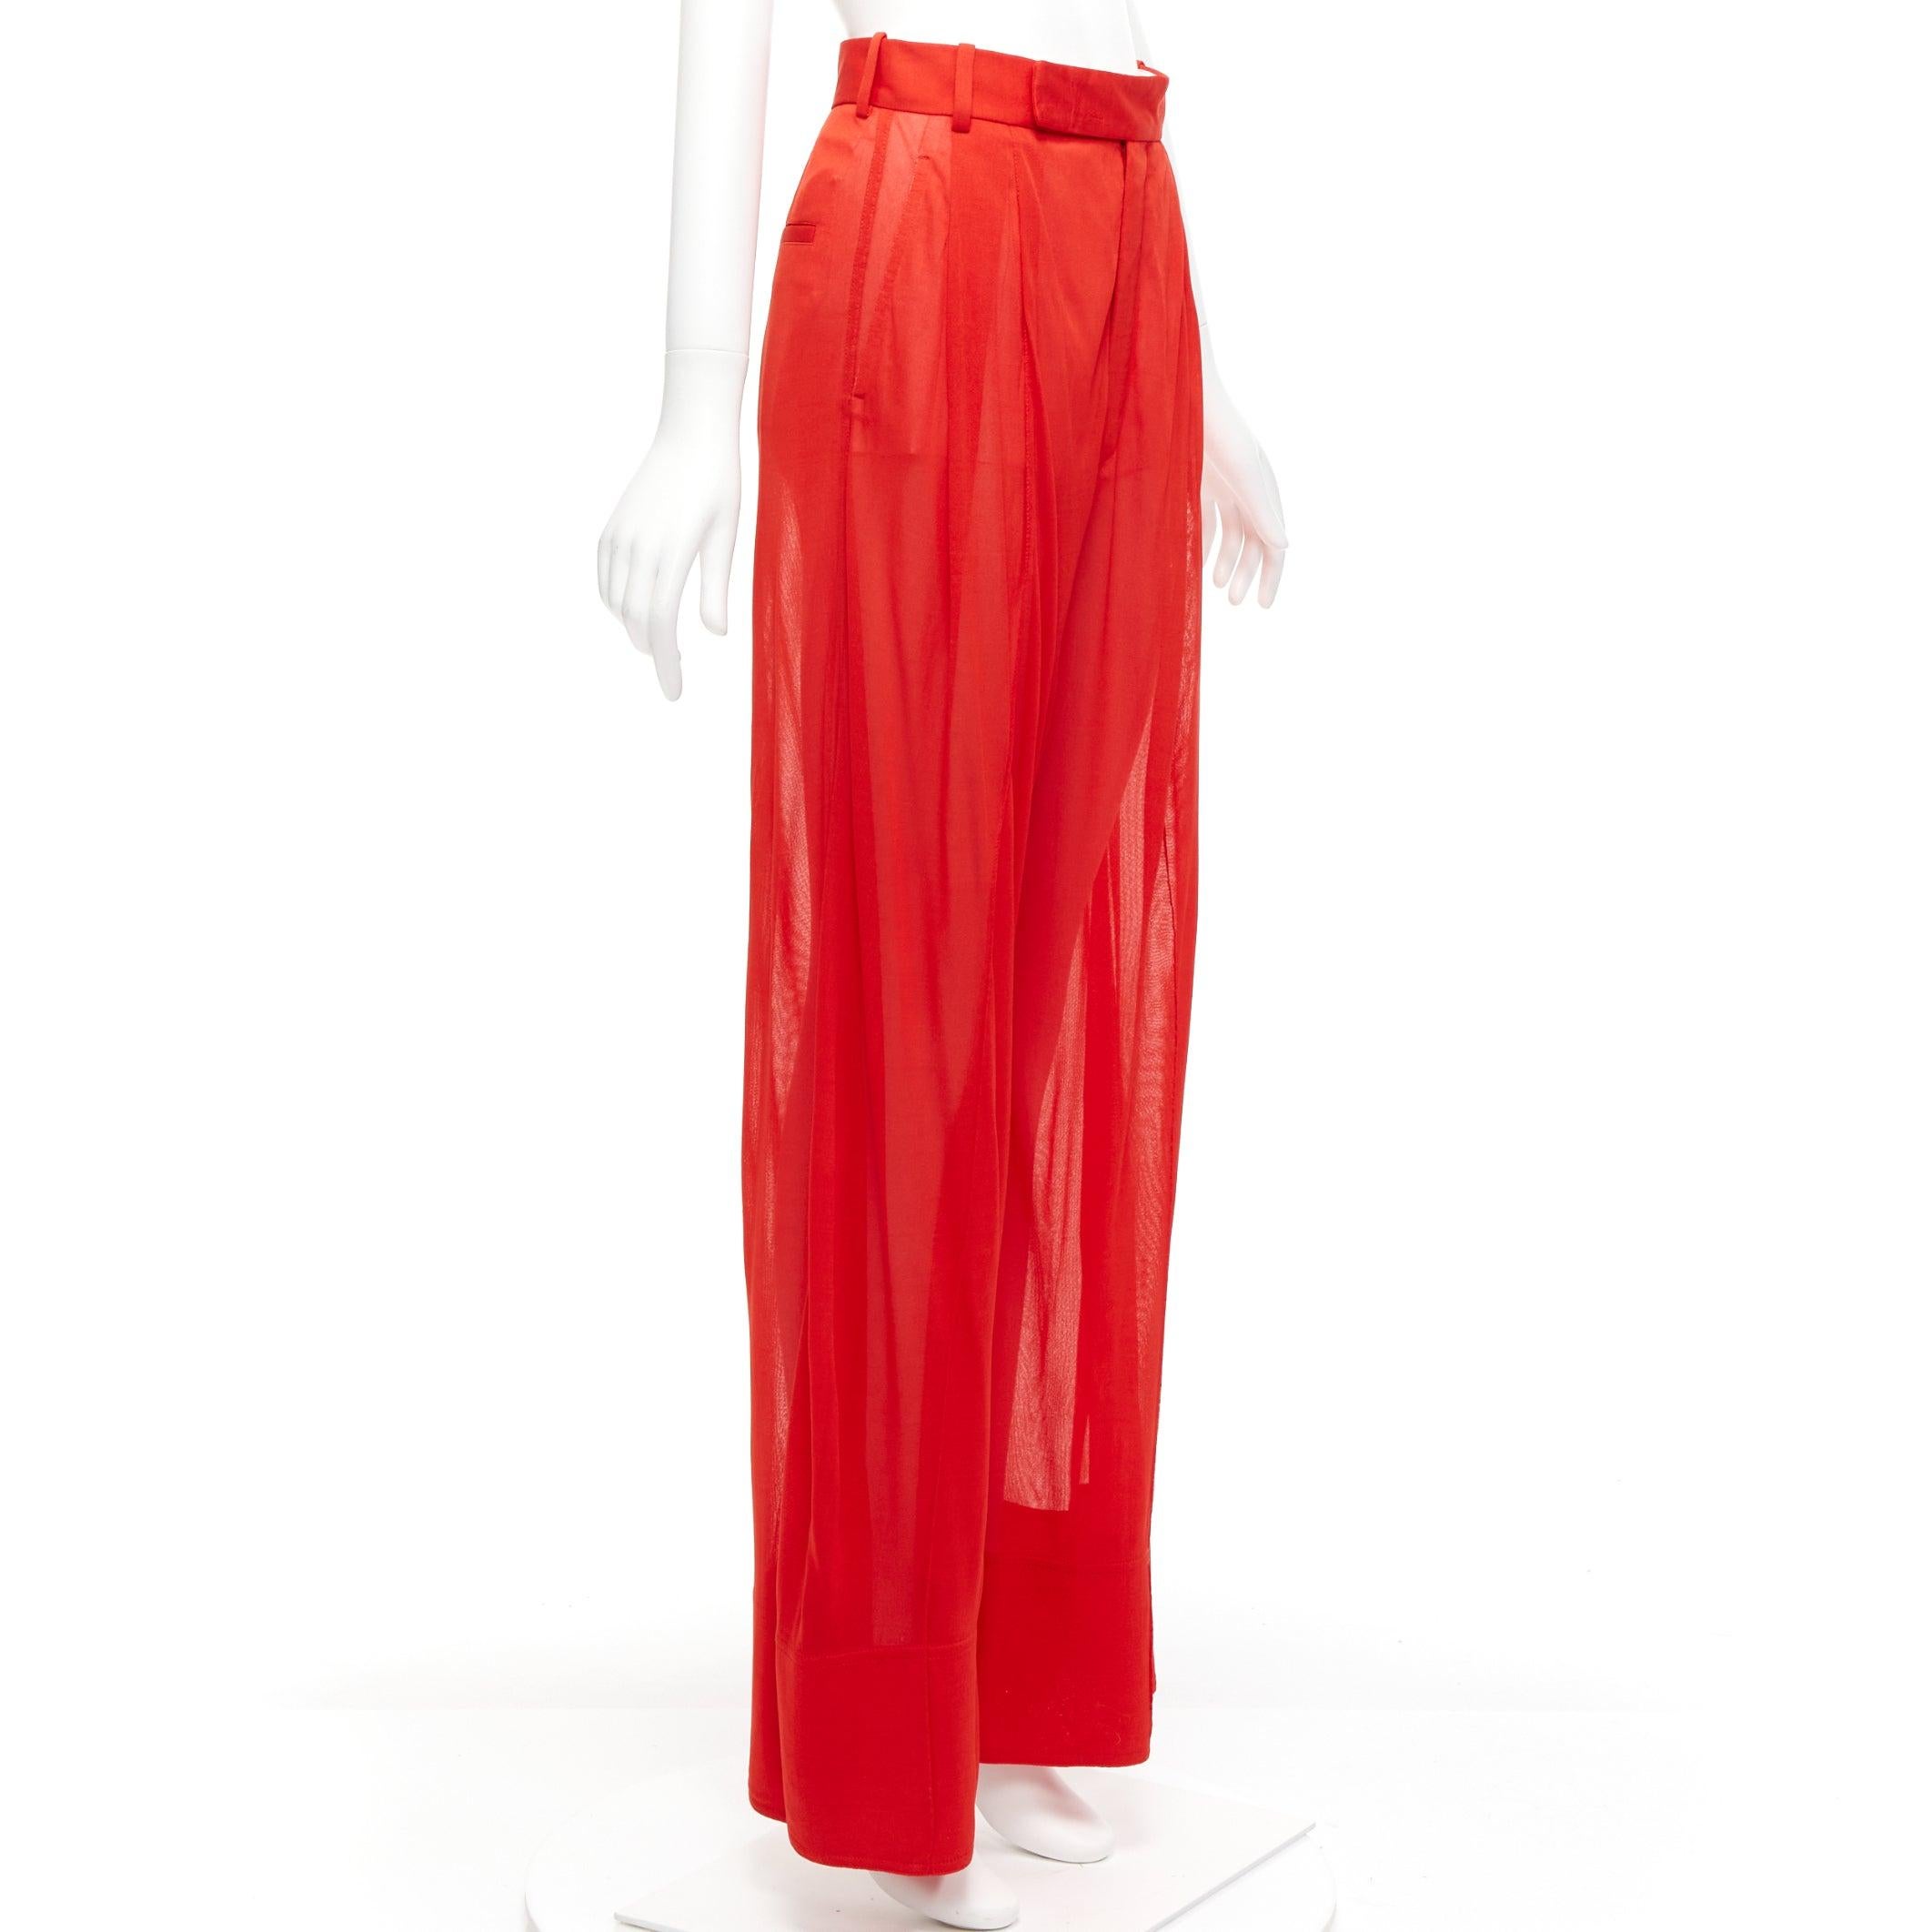 new OLD CELINE Phoebe Philo red sheer solid seam wide leg pants FR36 S
Reference: NKLL/A00057
Brand: Celine
Designer: Phoebe Philo
Material: Viscose
Color: Red
Pattern: Solid
Closure: Zip Fly
Lining: Cotton
Extra Details: Partially lined with